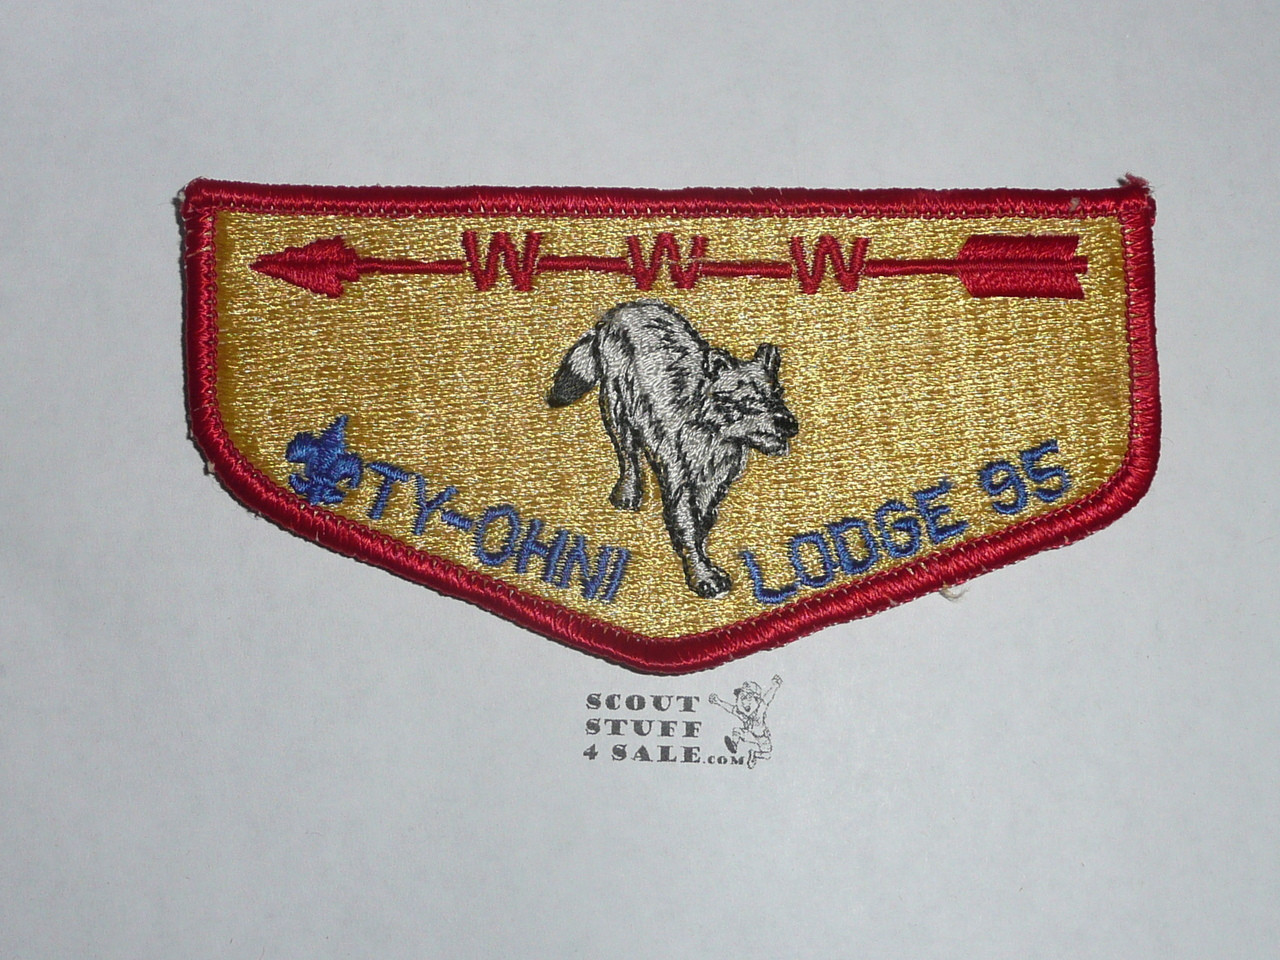 Order of the Arrow Lodge #95 Ty-Ohni s8 Flap Patch